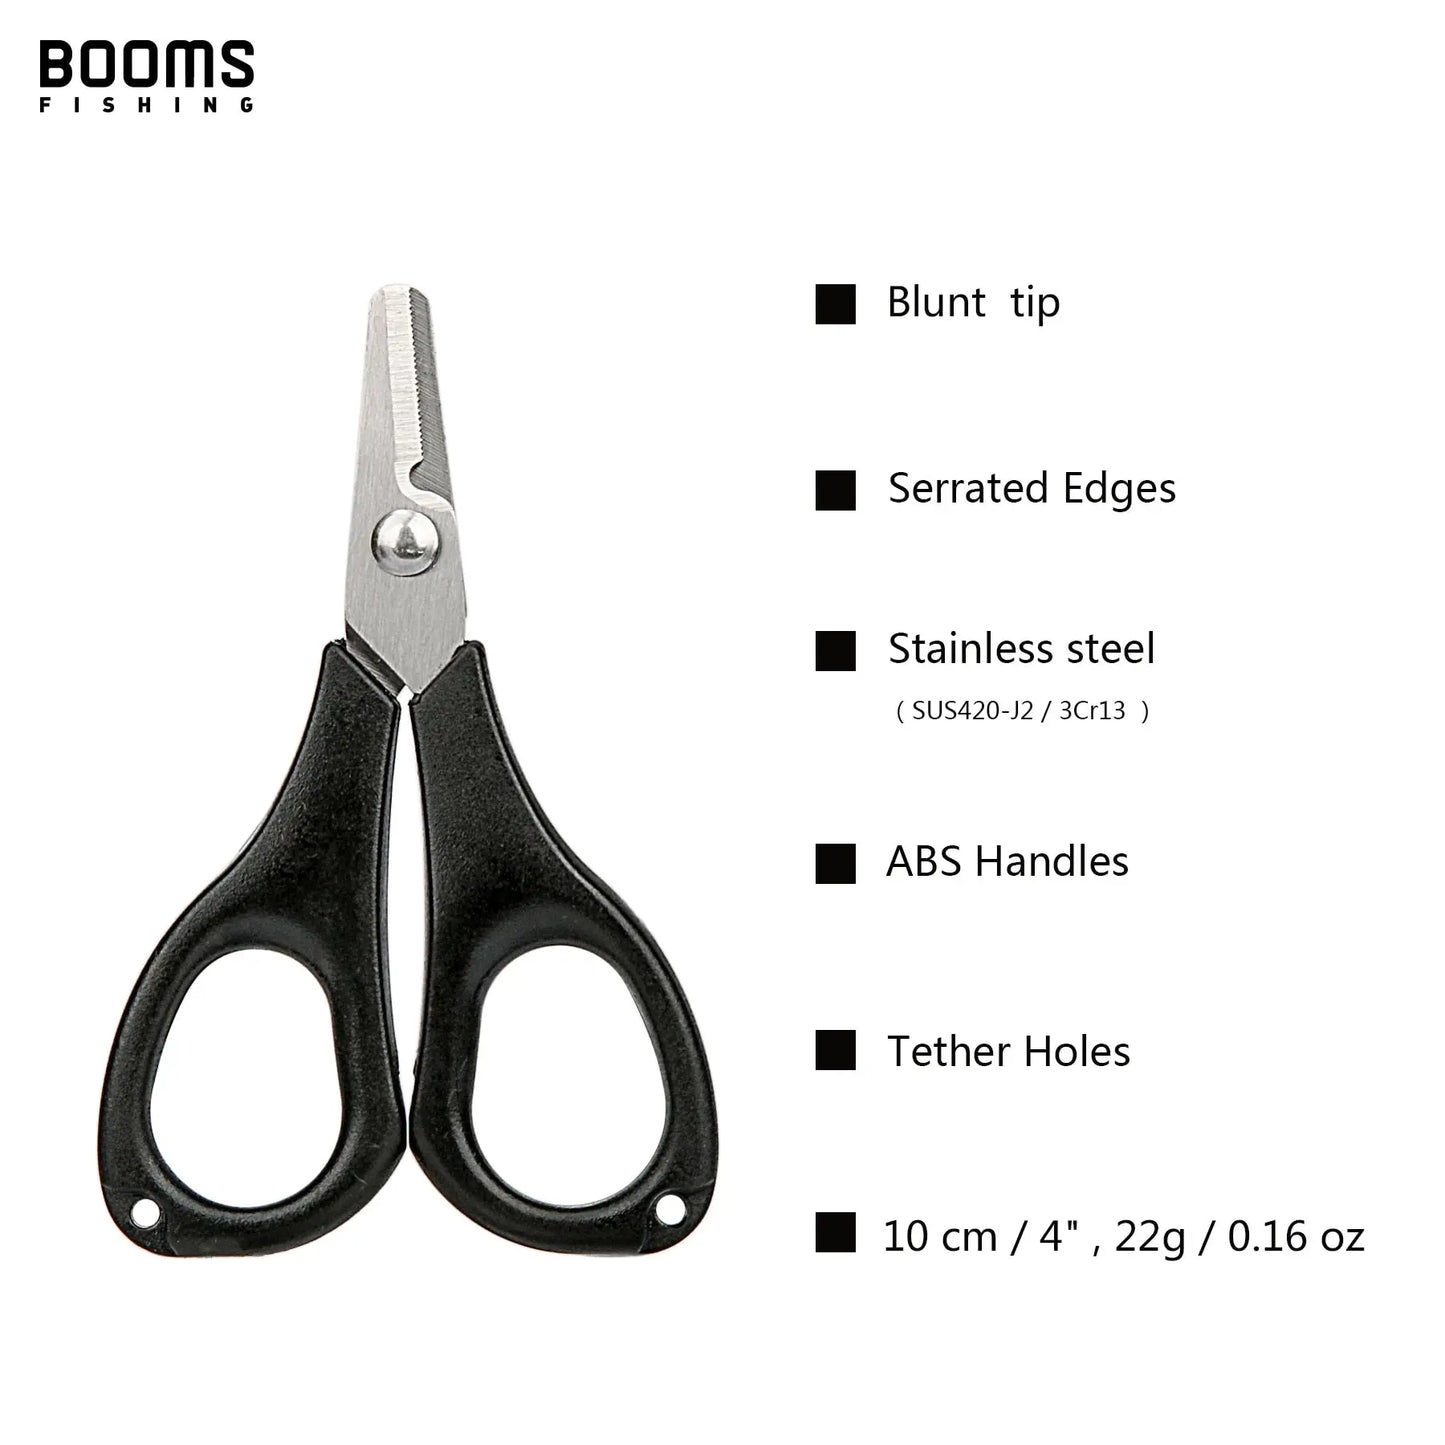 Booms Fishing Stainless Steel Scissors with Retractable Holder Booms